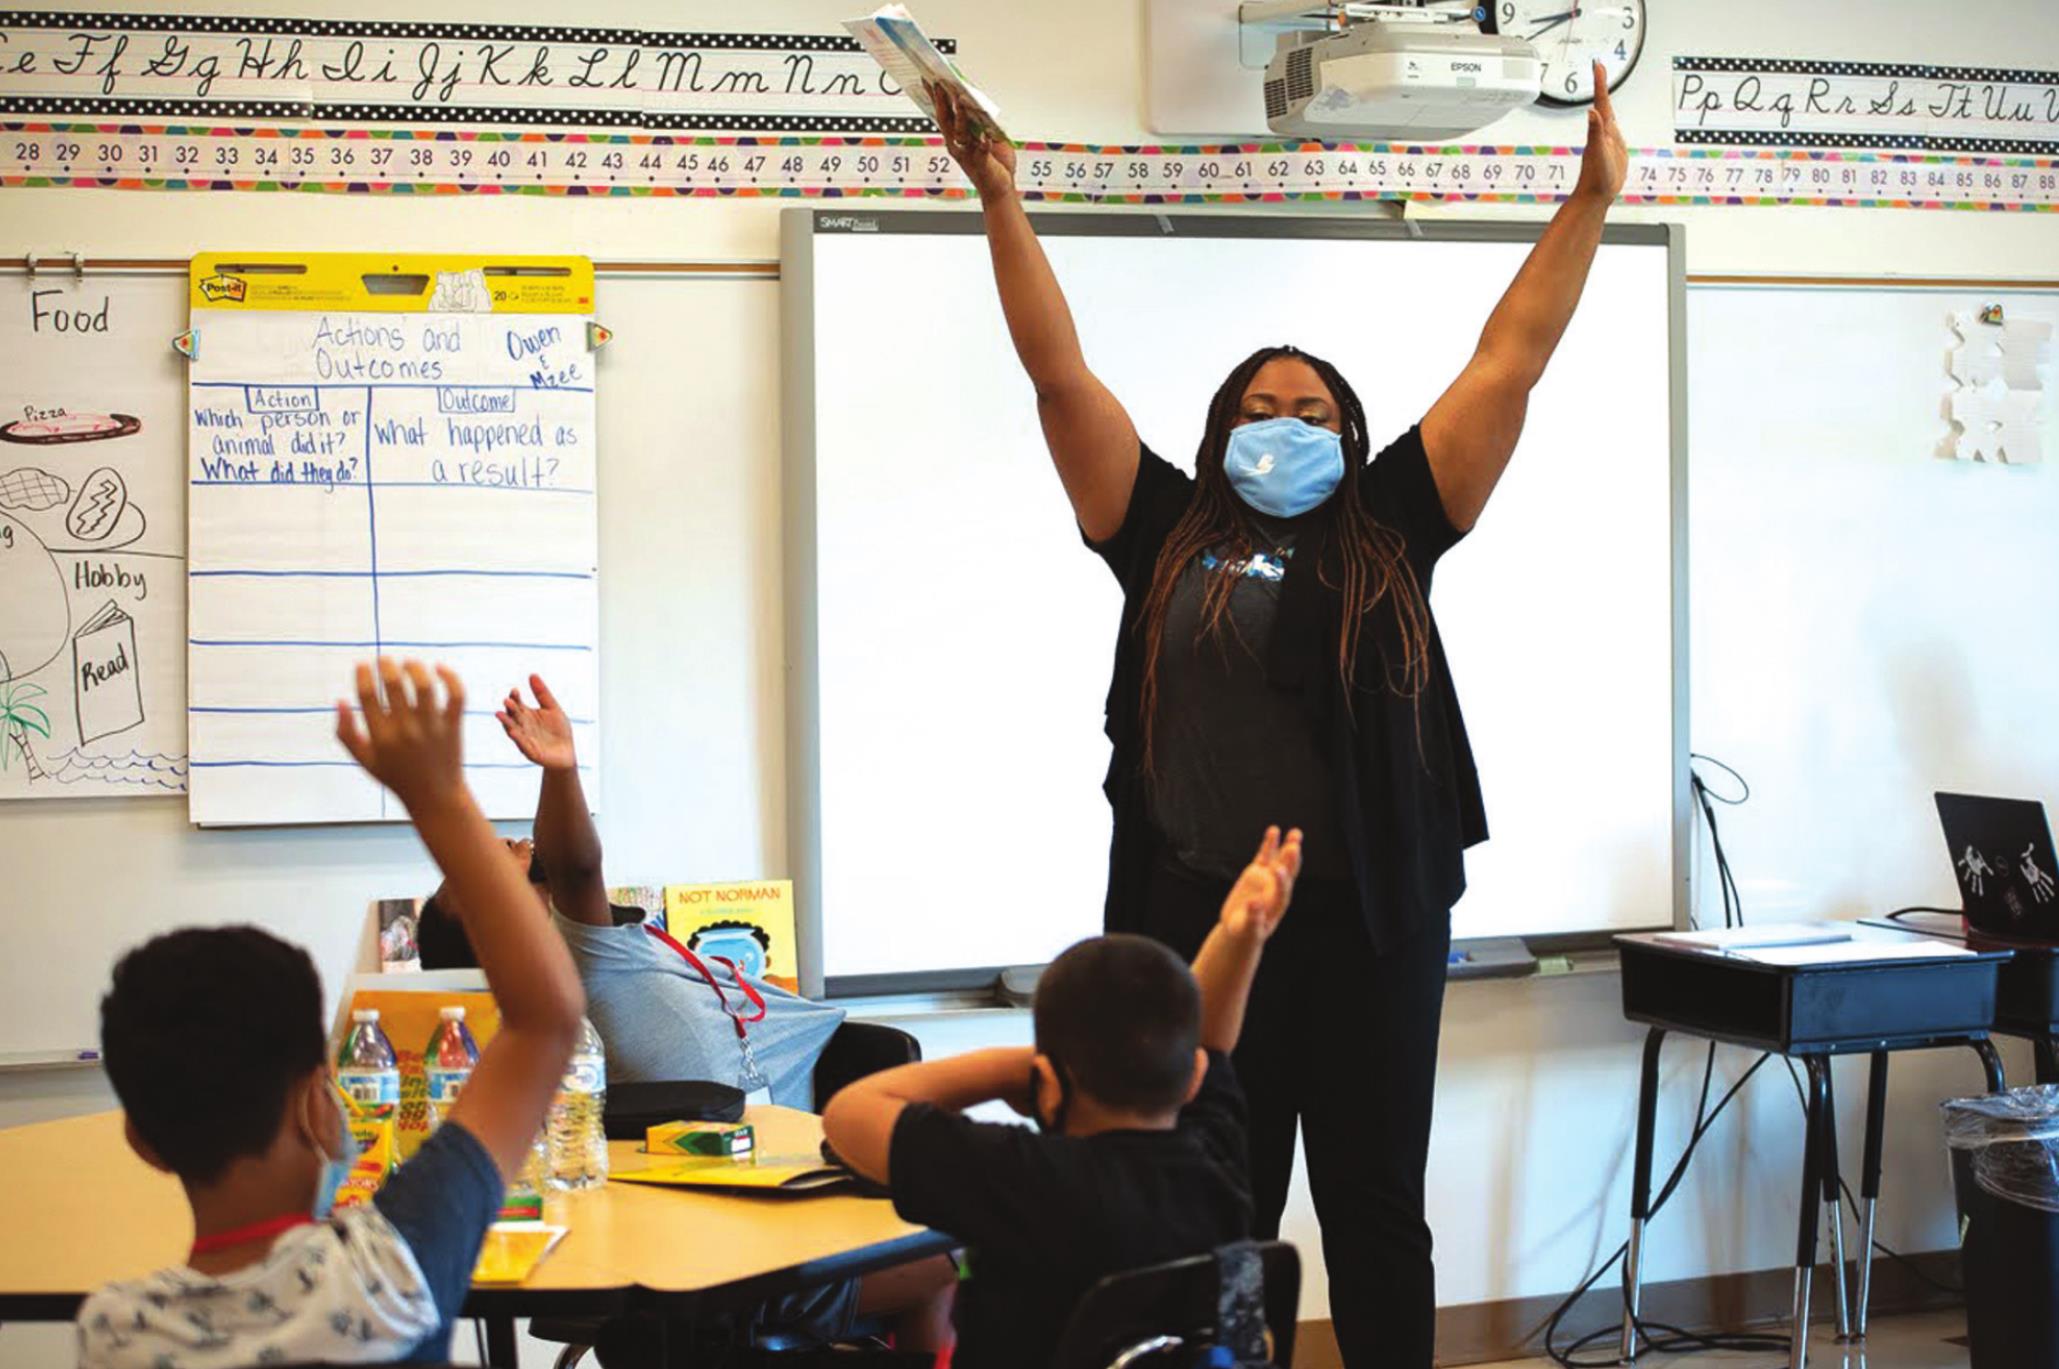 Quanetta Broom, a school counselor at Cesar Chavez Elementary School in Oklahoma City, asks second graders to raise their hands if they’re having a good day after learning about Whitney Bryen/Oklahoma Watch